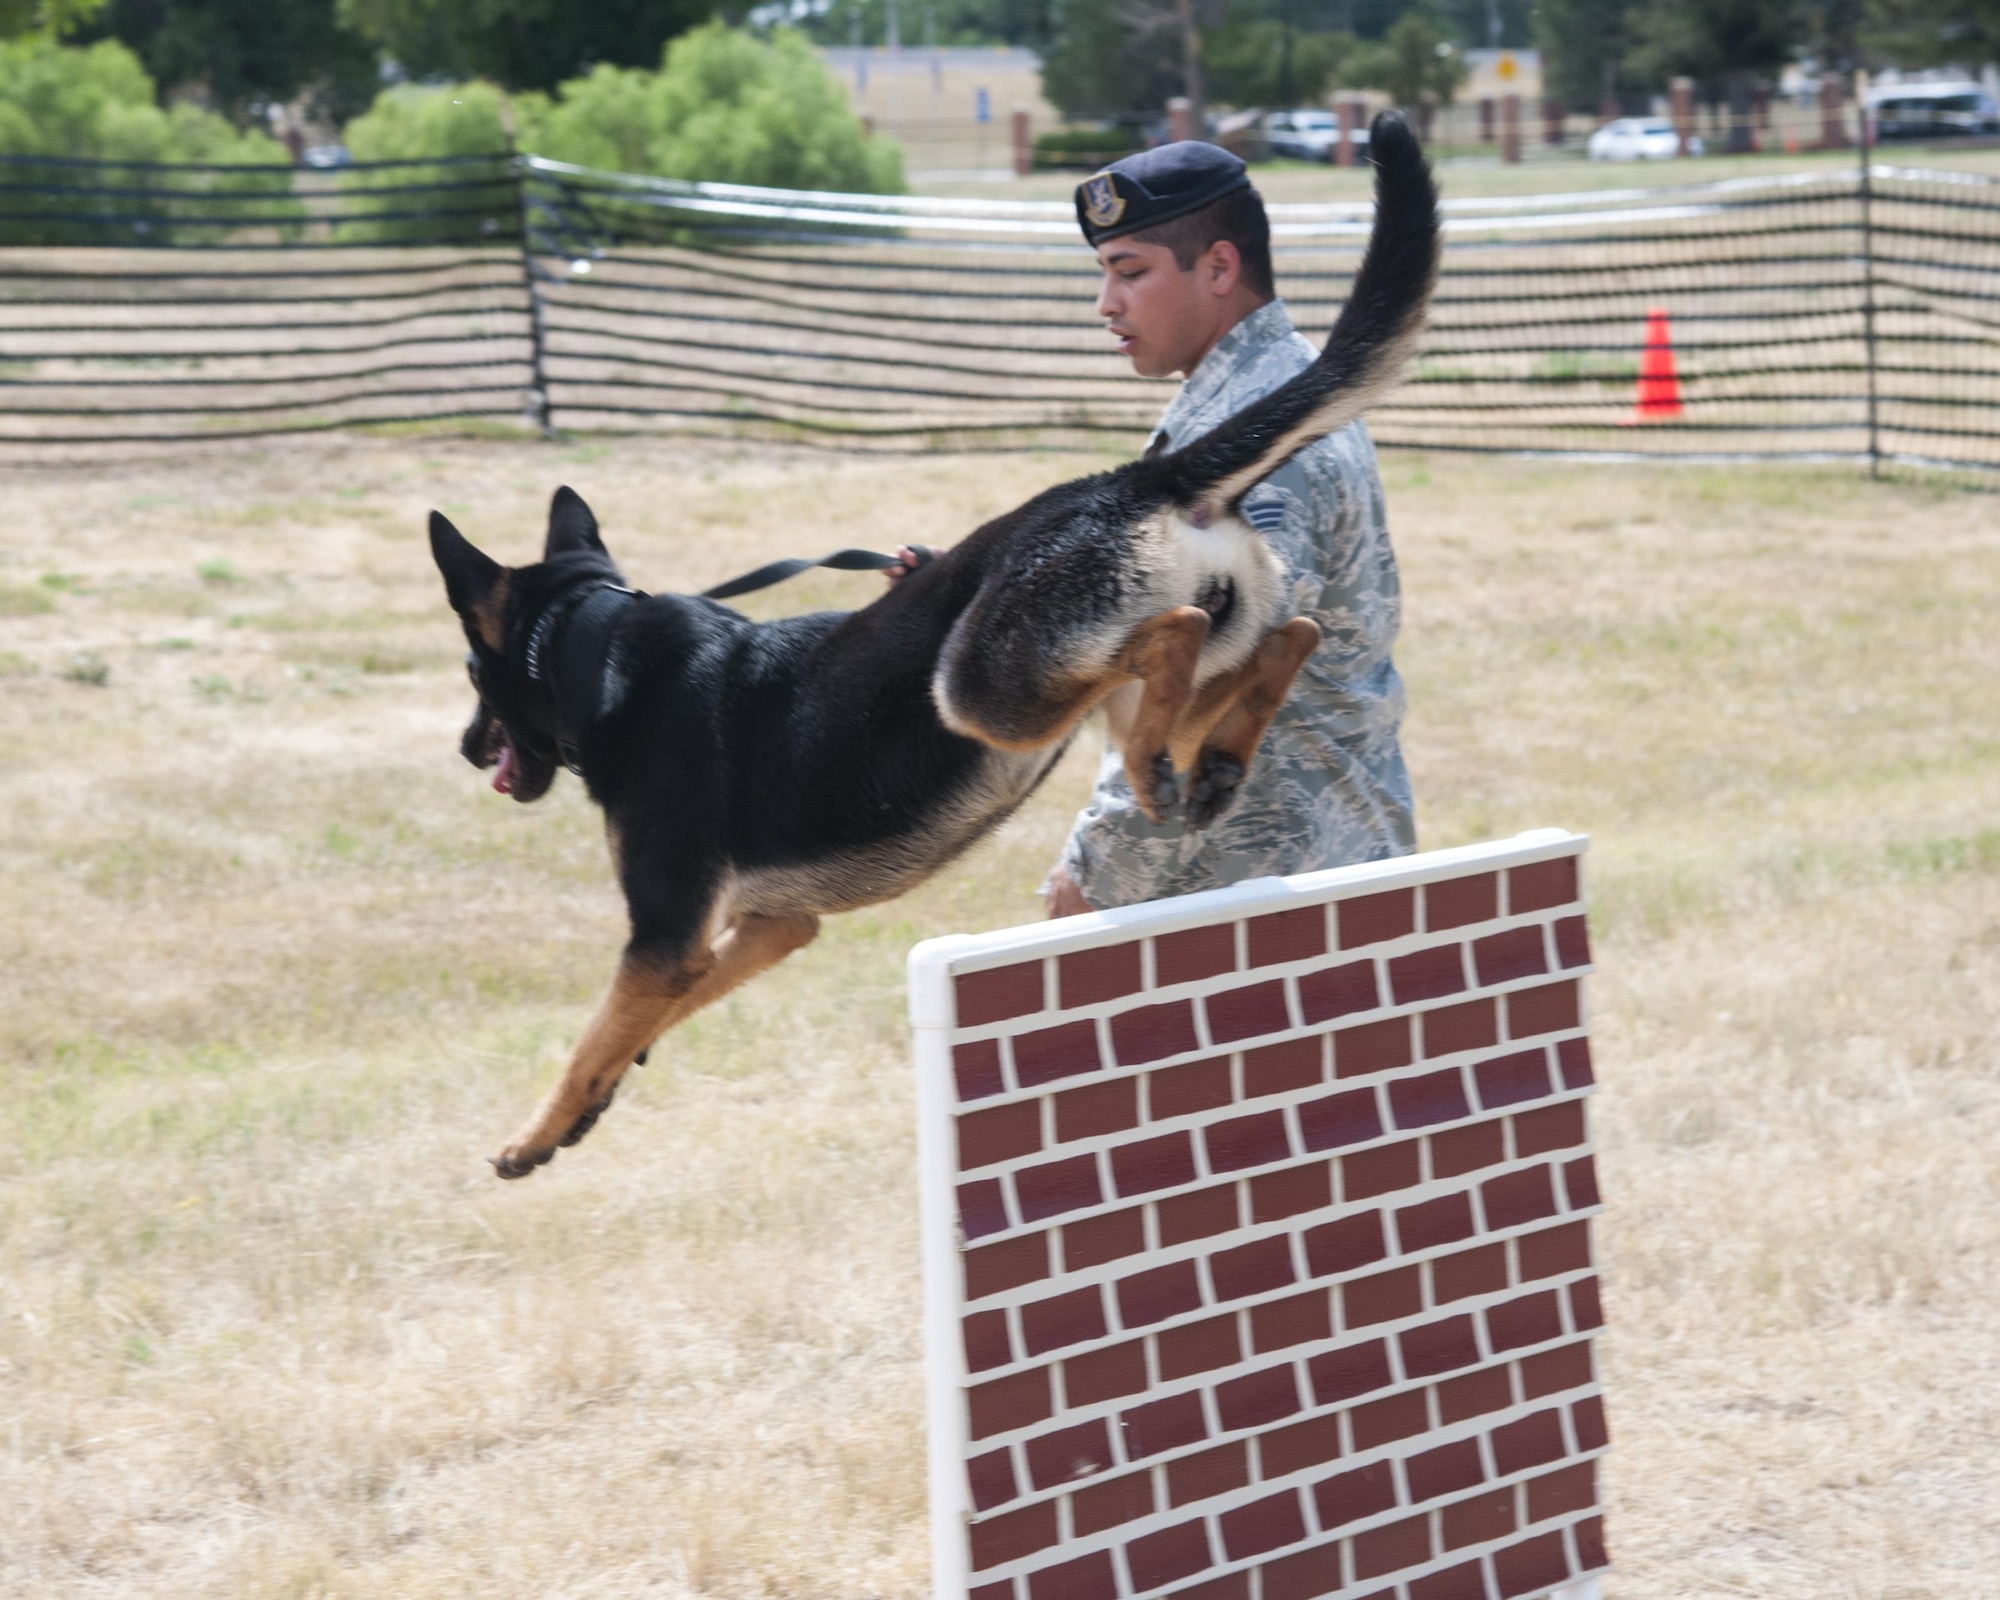 Senior Airman Desi Padilla, 90th Security Forces Squadron military working dog handler, guides MWD Eby, over an obstacle in a demonstration July 22, 2016, during Fort D.A. Russell Days, the annual F.E. Warren Air Force Base, Wyo., open house. The open house gives visitors a glimpse into the mission of the 90th Missile Wing. (U.S. Air Force photo by Senior Airman Jason Wiese)